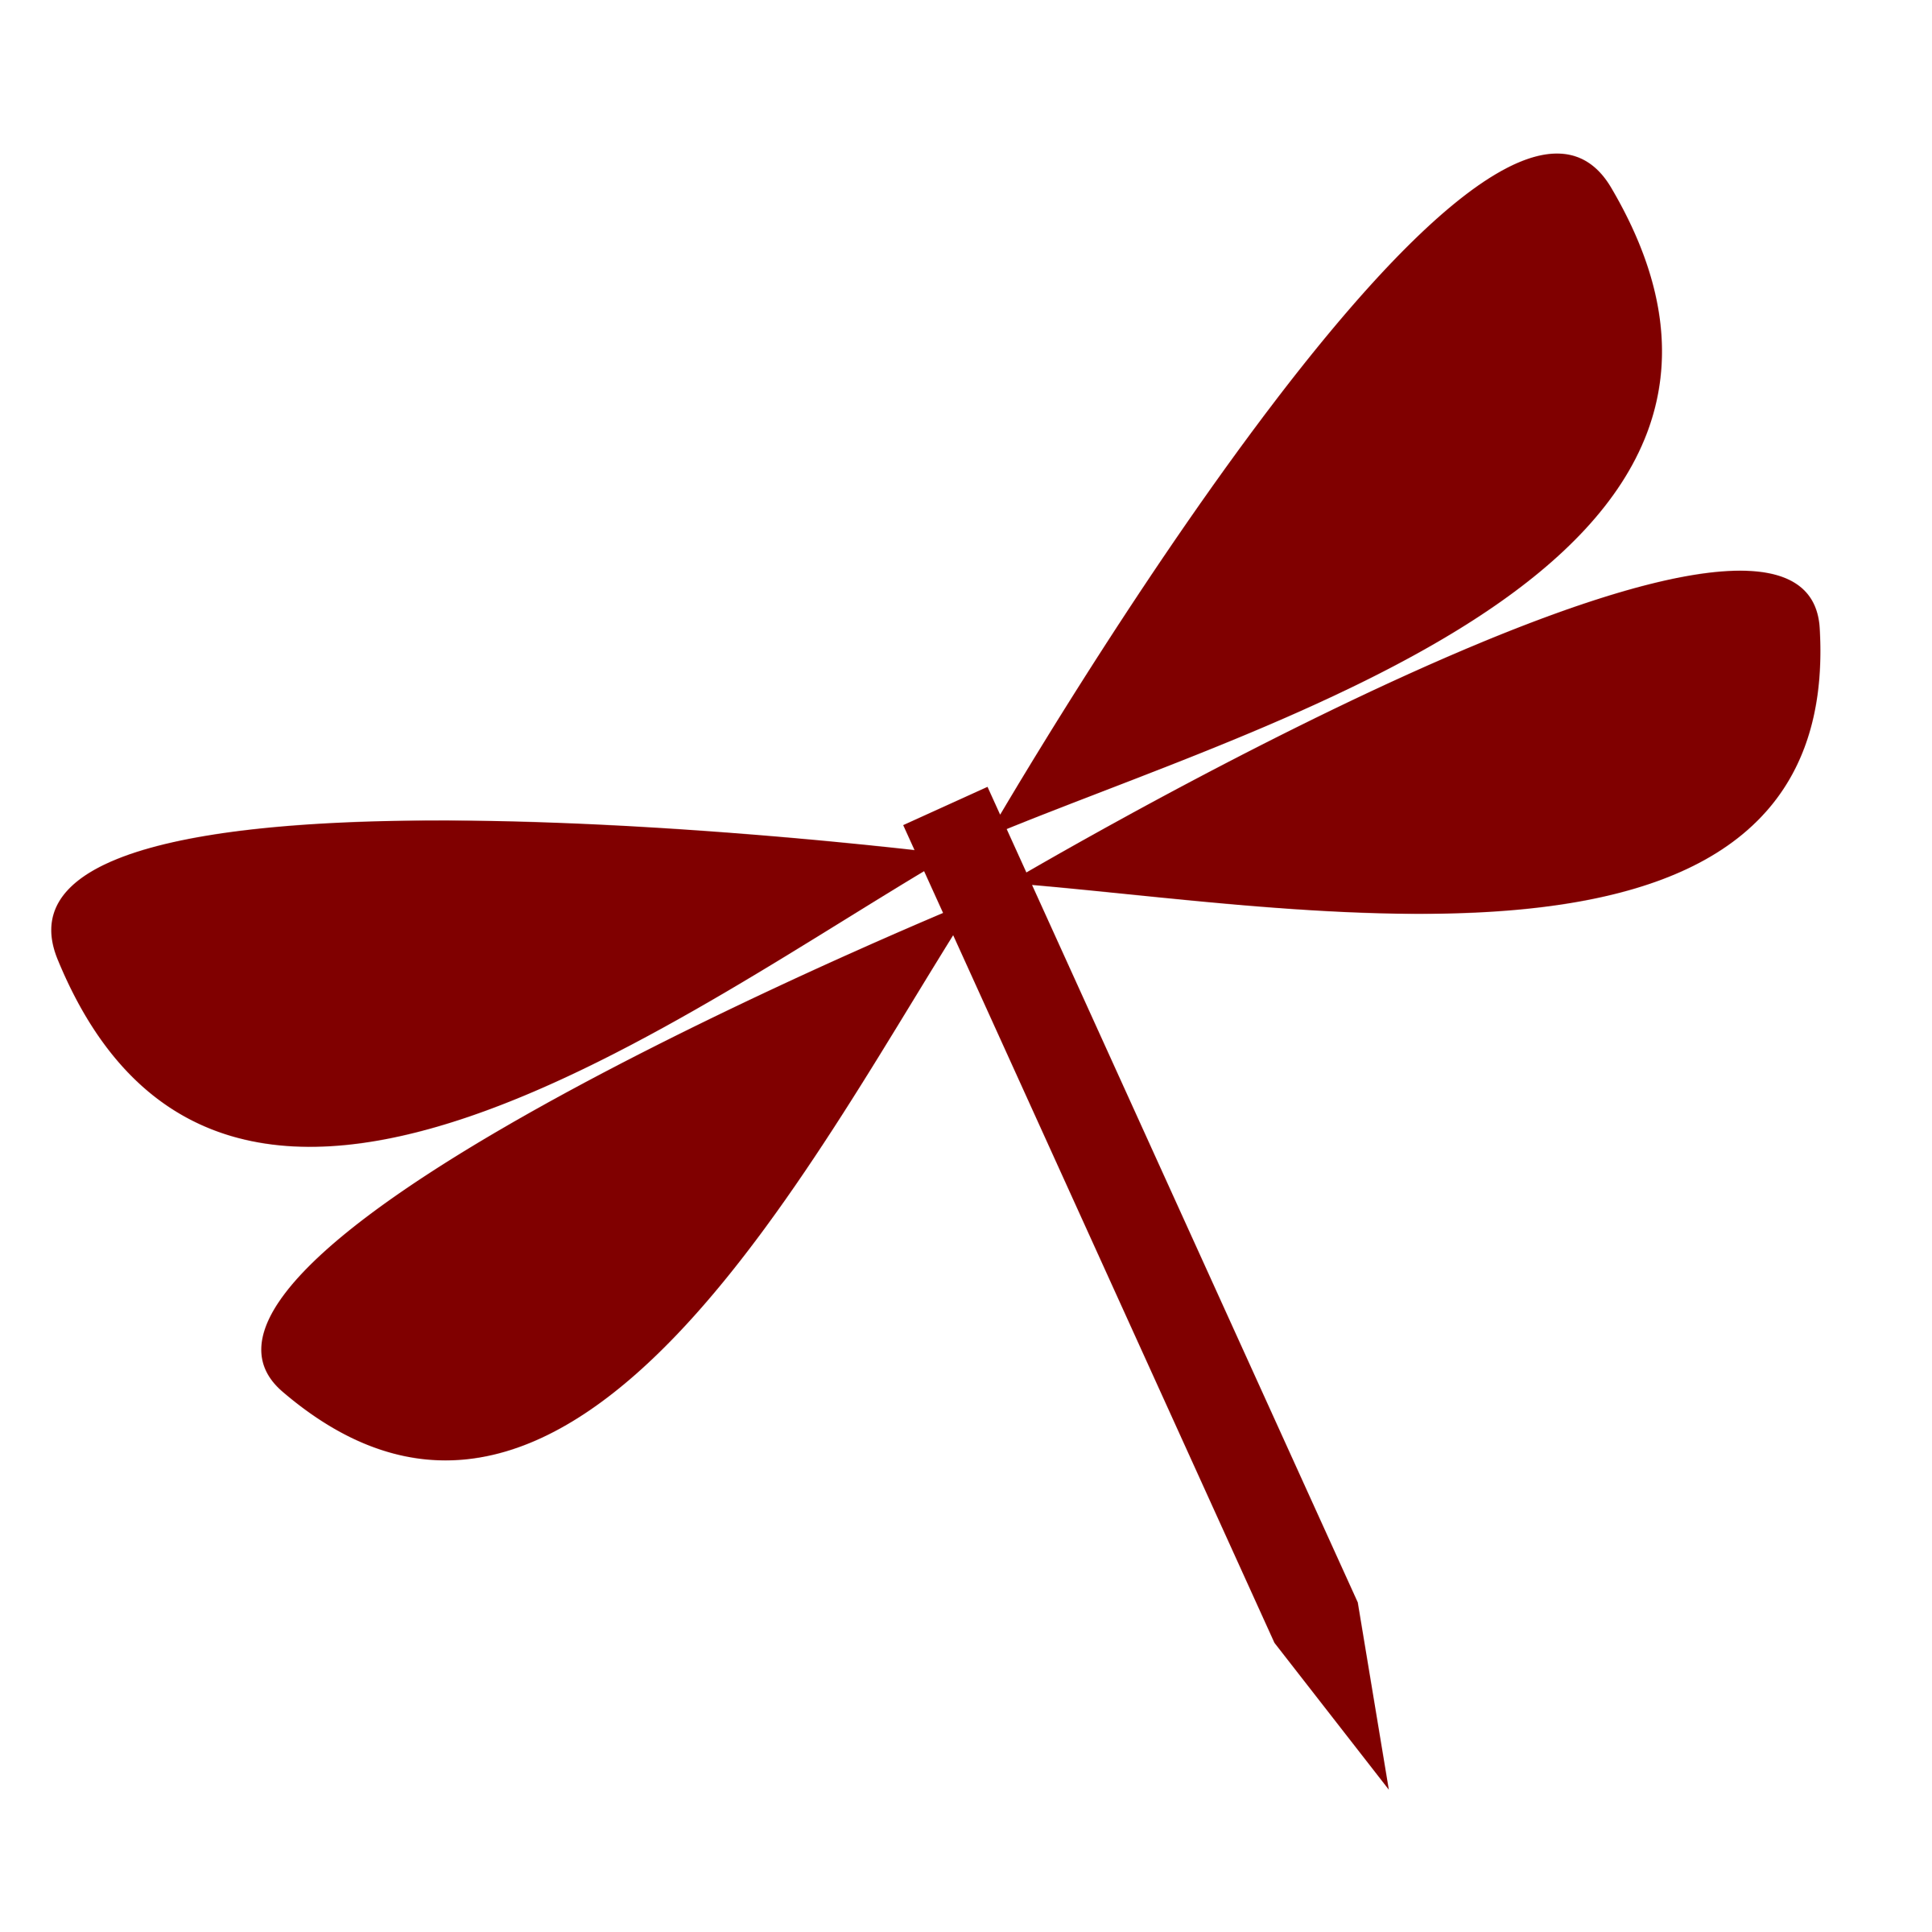 One color flat big. Dragonfly clipart red dragonfly